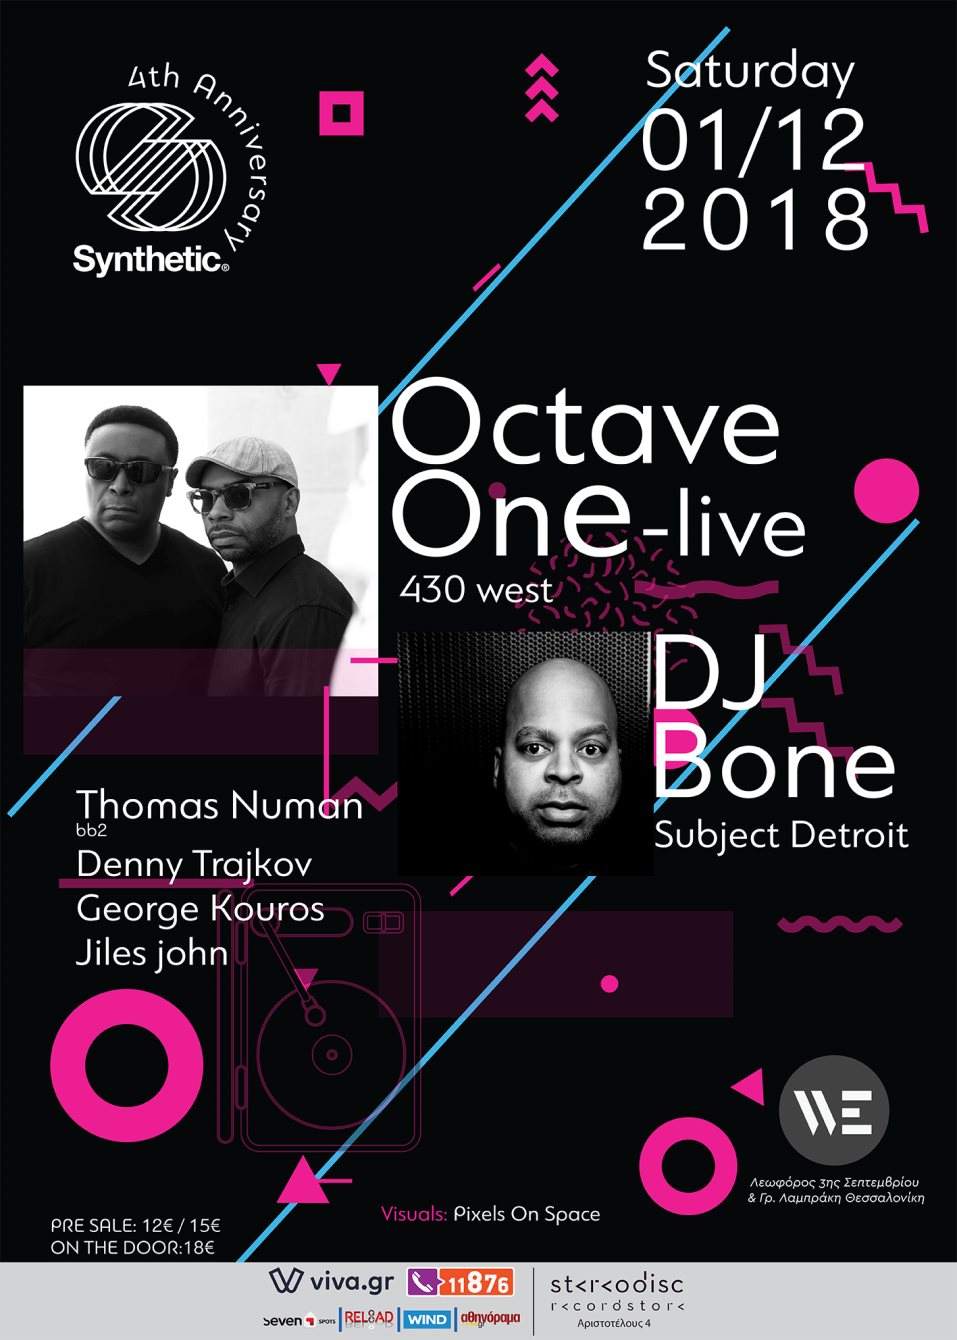 Synthetic 4th Anniversary with Octave One-Live & DJ Bone - Página frontal